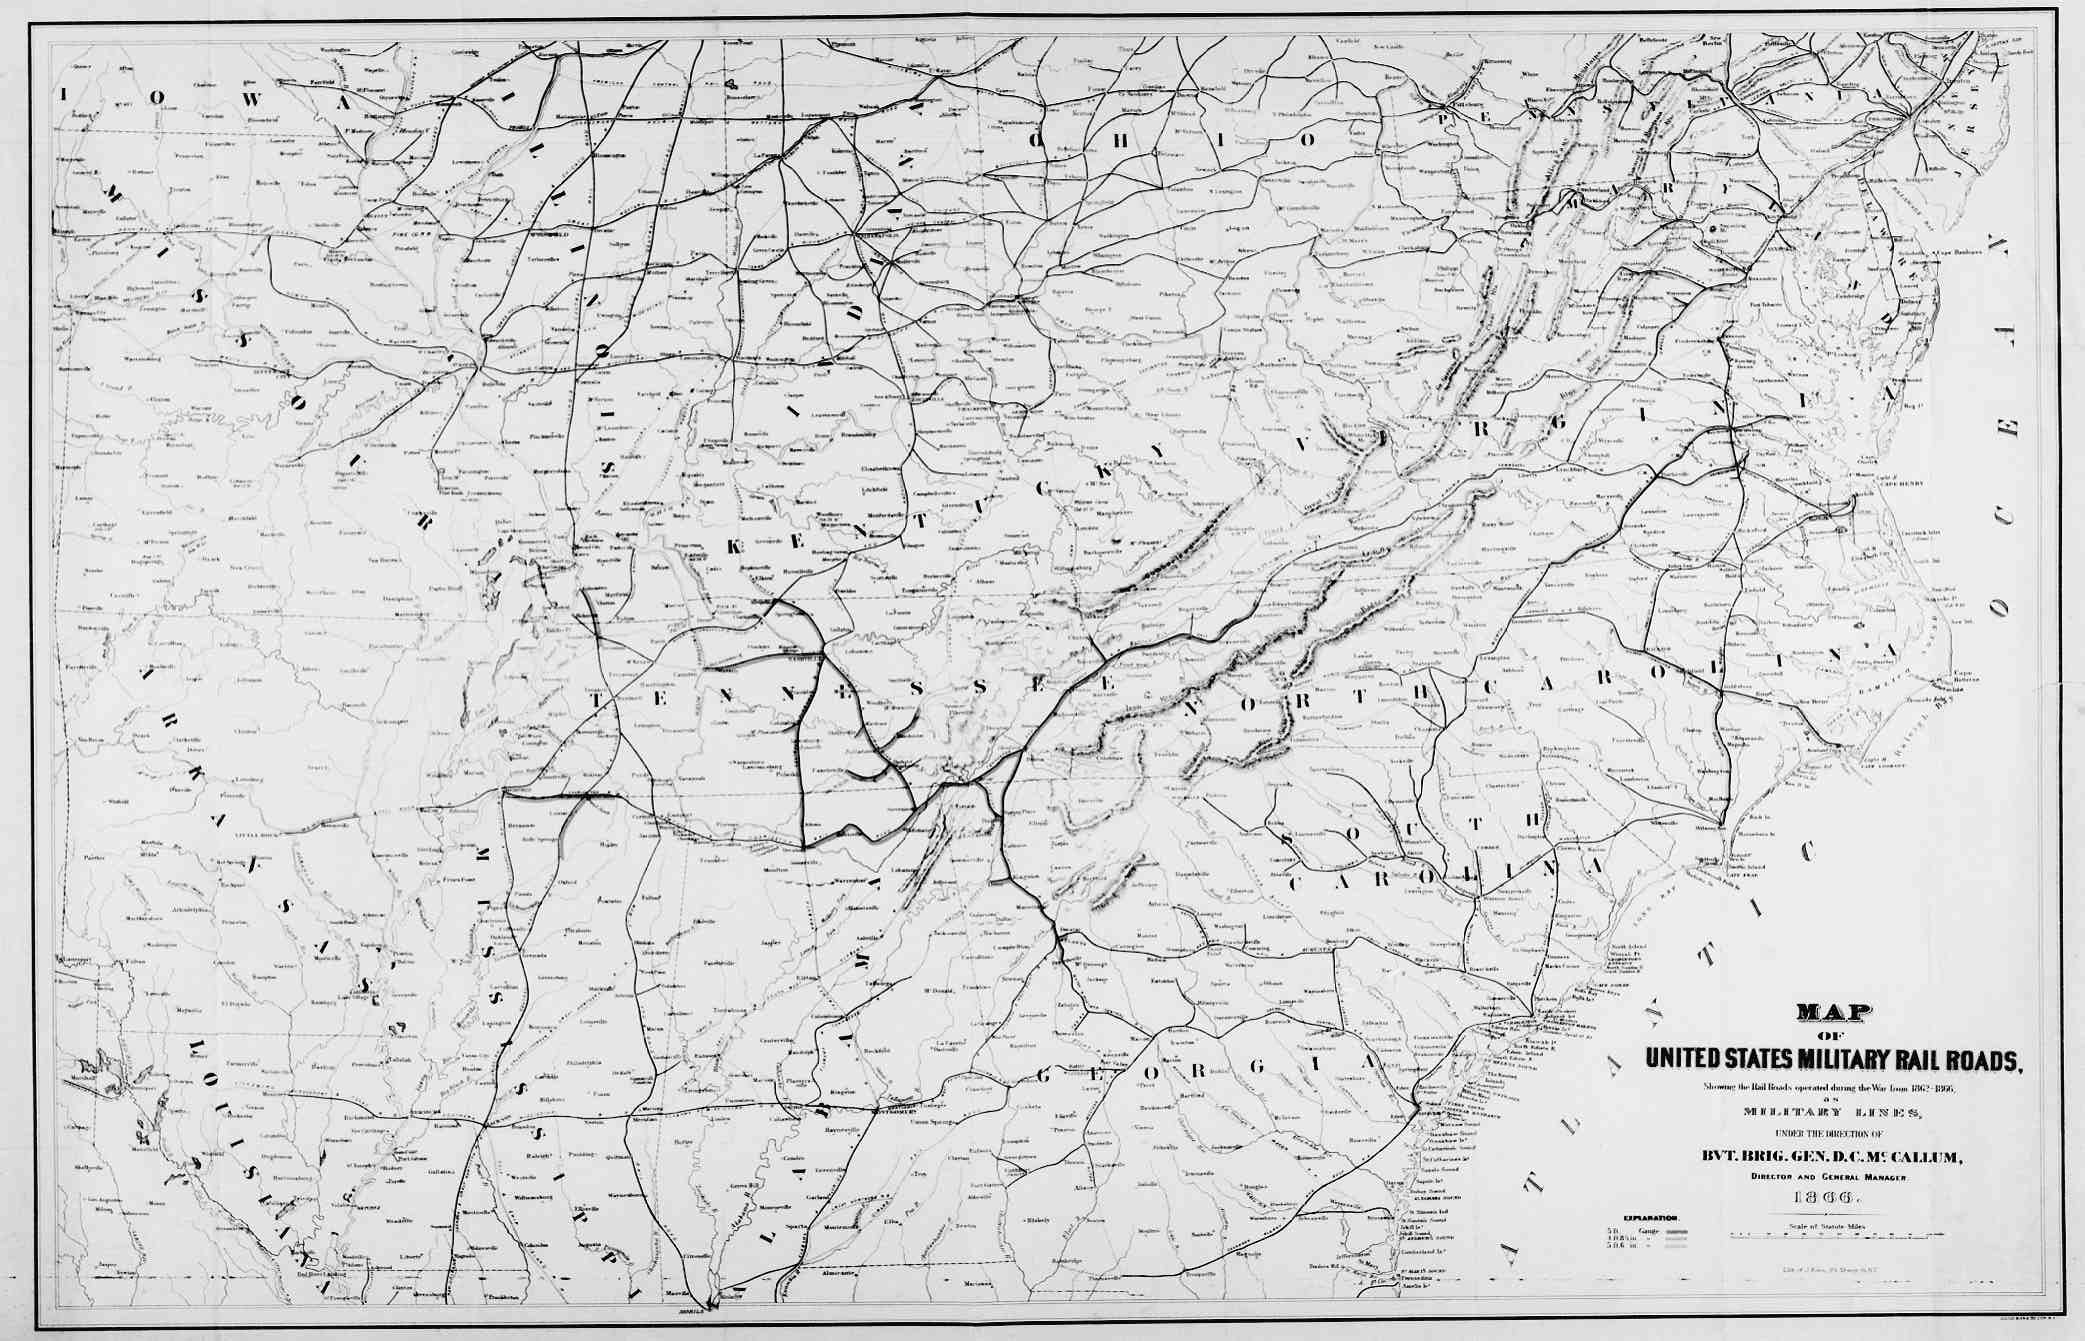 Hargrett Library Rare Map Collection - Transportation